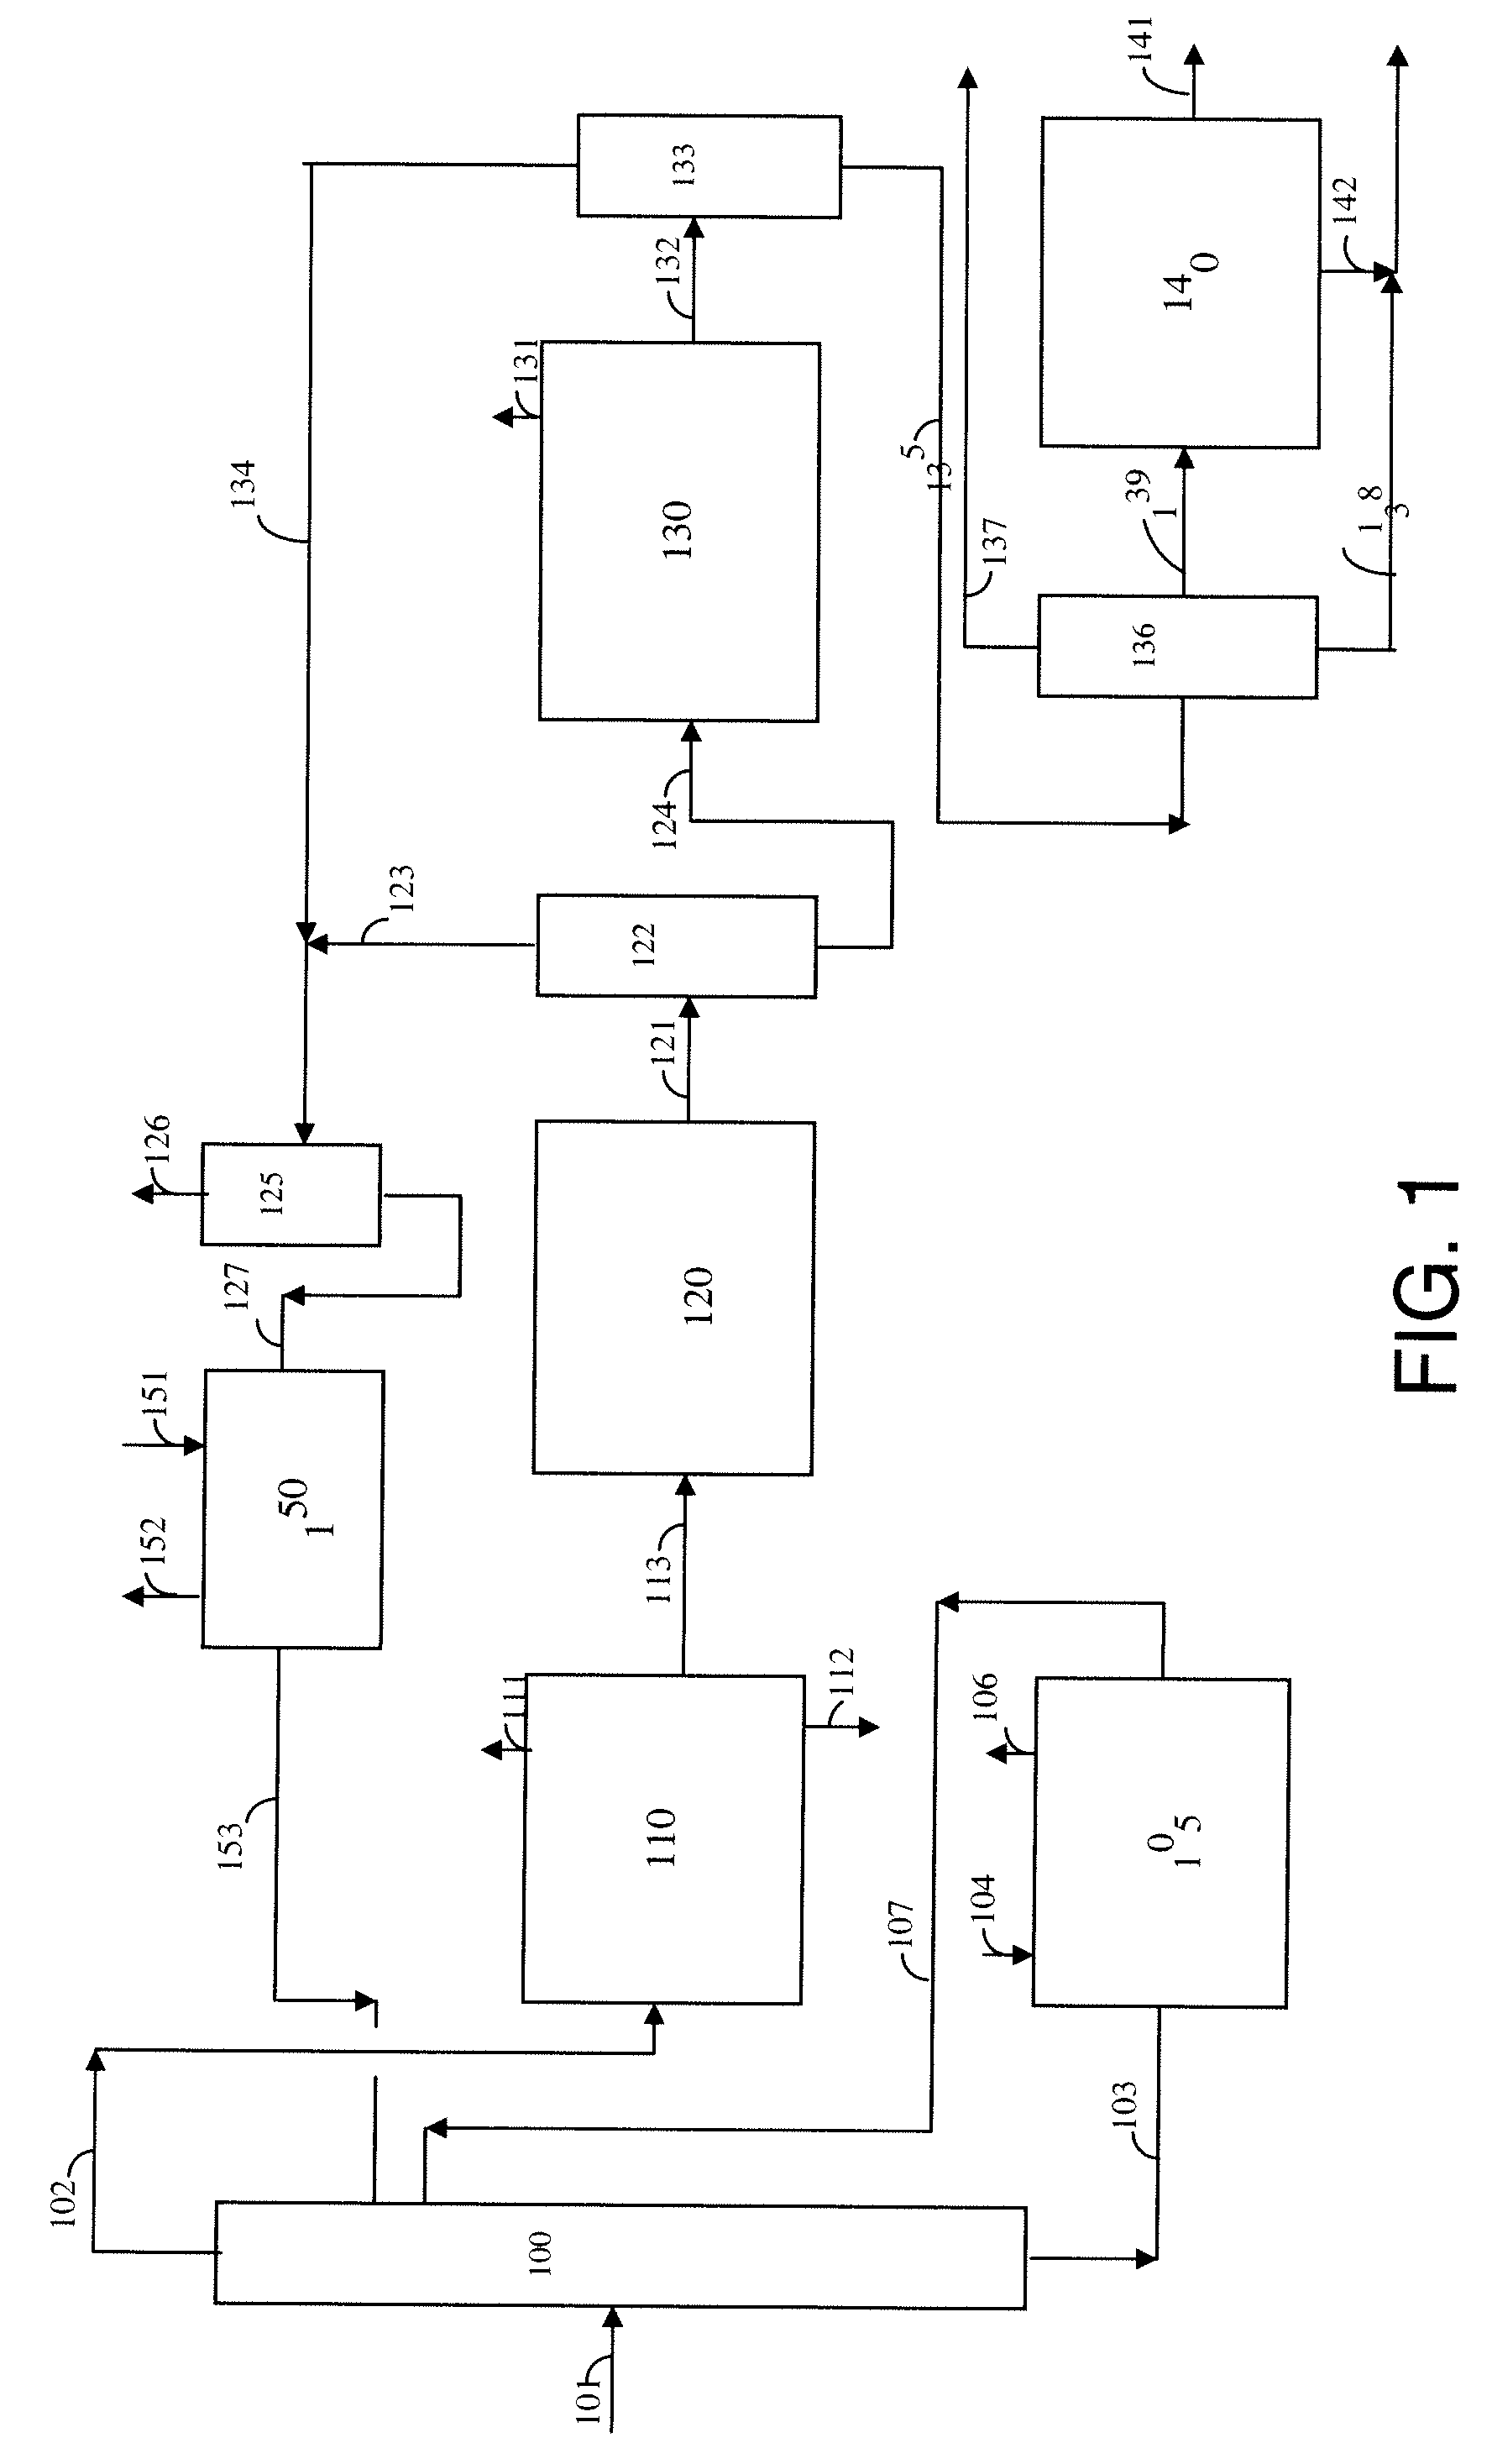 Process for para-xylene production from light aliphatics